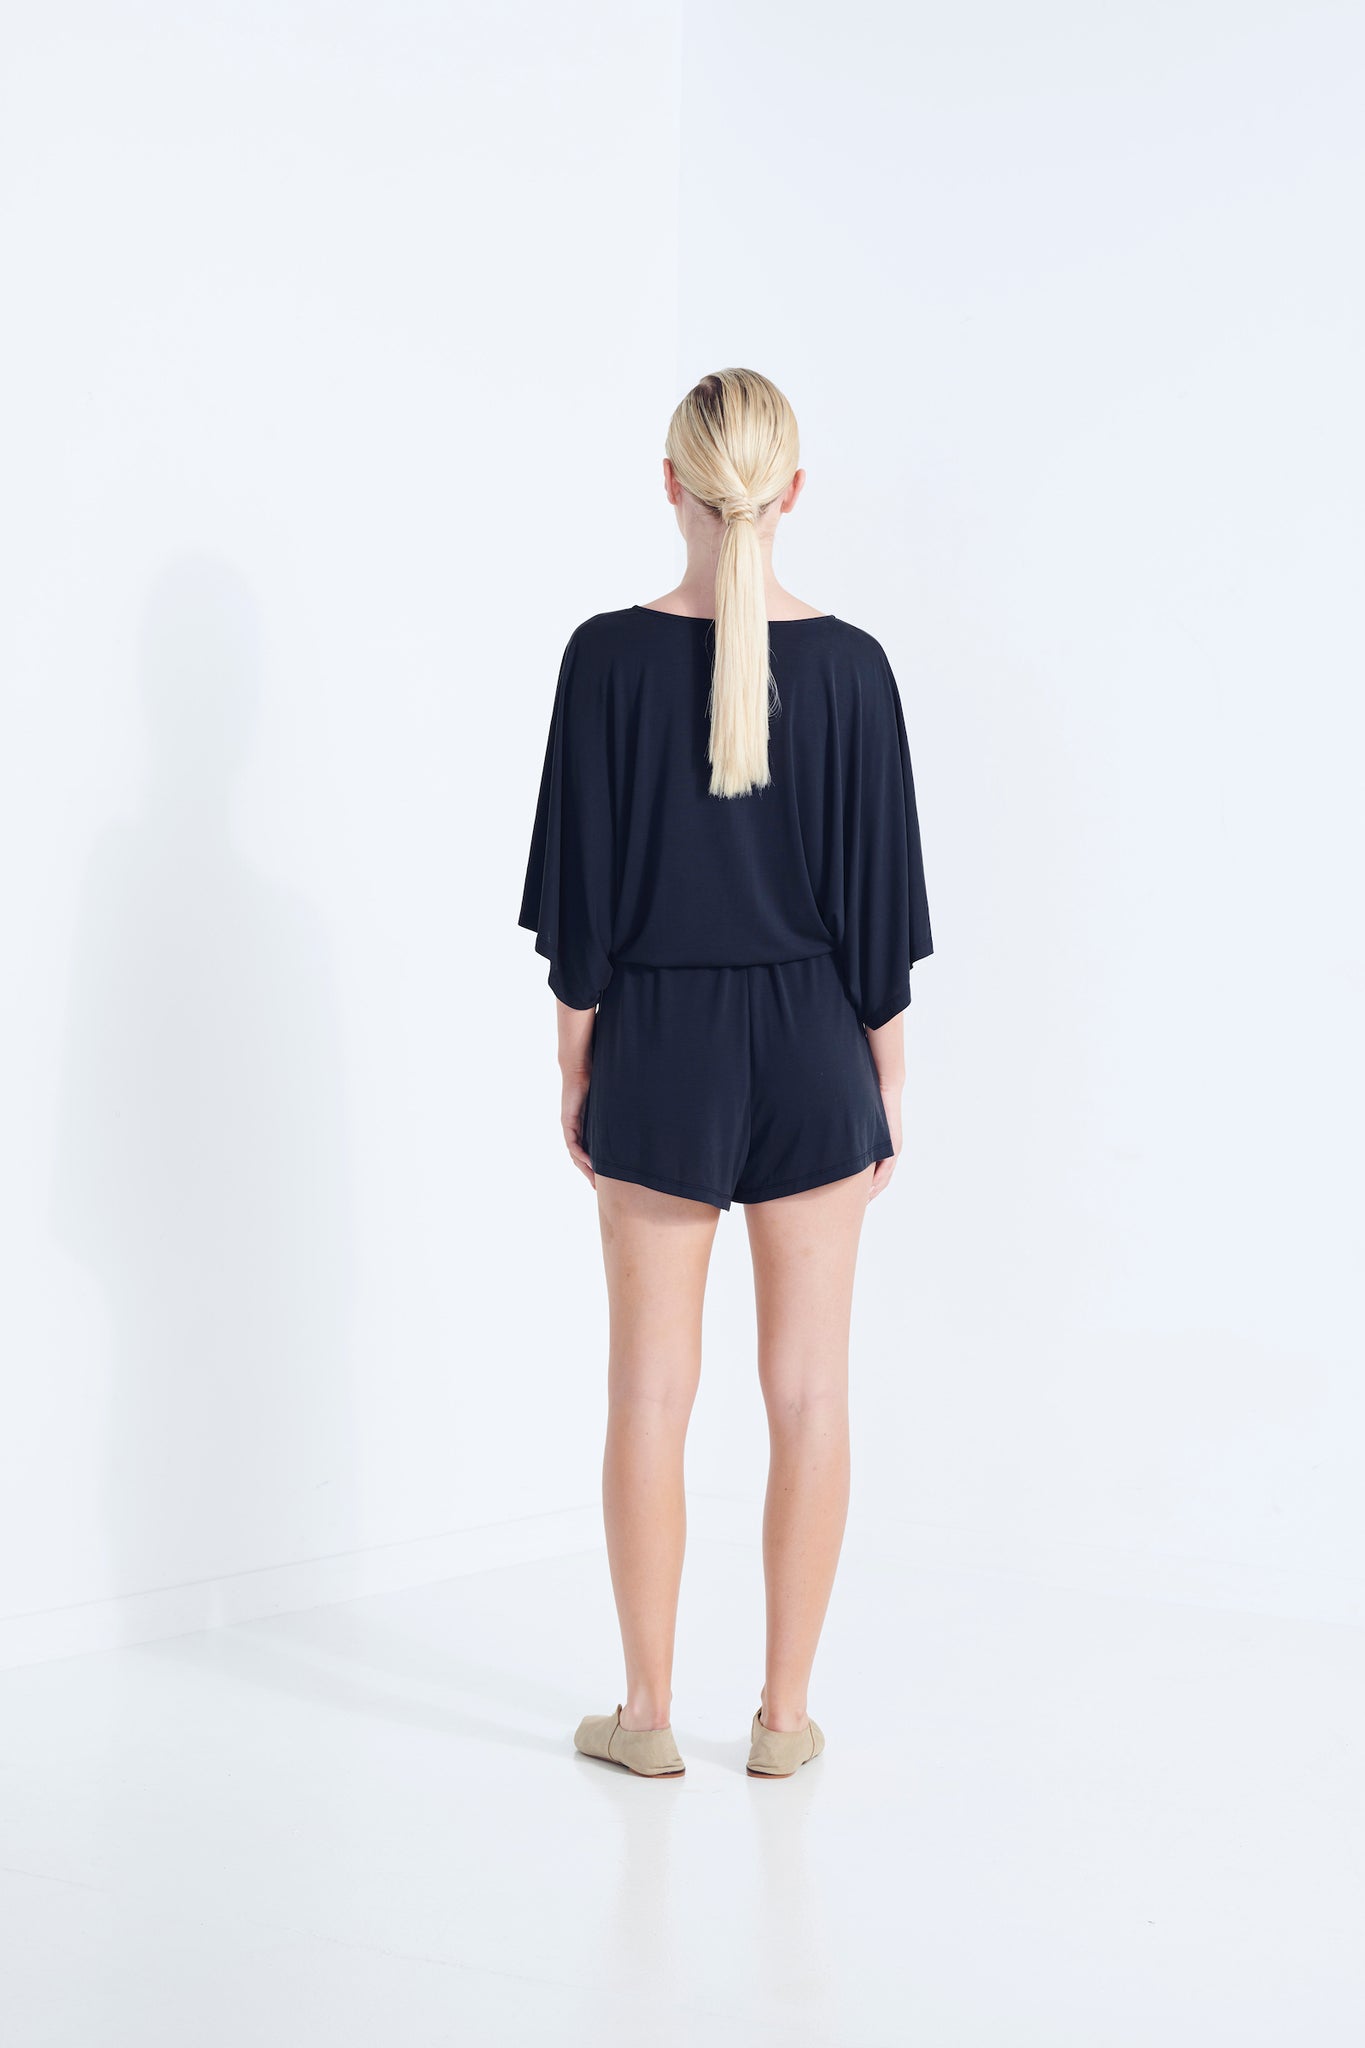 CARRIE PLAYSUIT BEECHWOOD MODAL STRETCH ROMPER  WITH WRAP FRONT TIE WAIST AND POCKETS IN DARK WASHED BLACK BACK VIEW